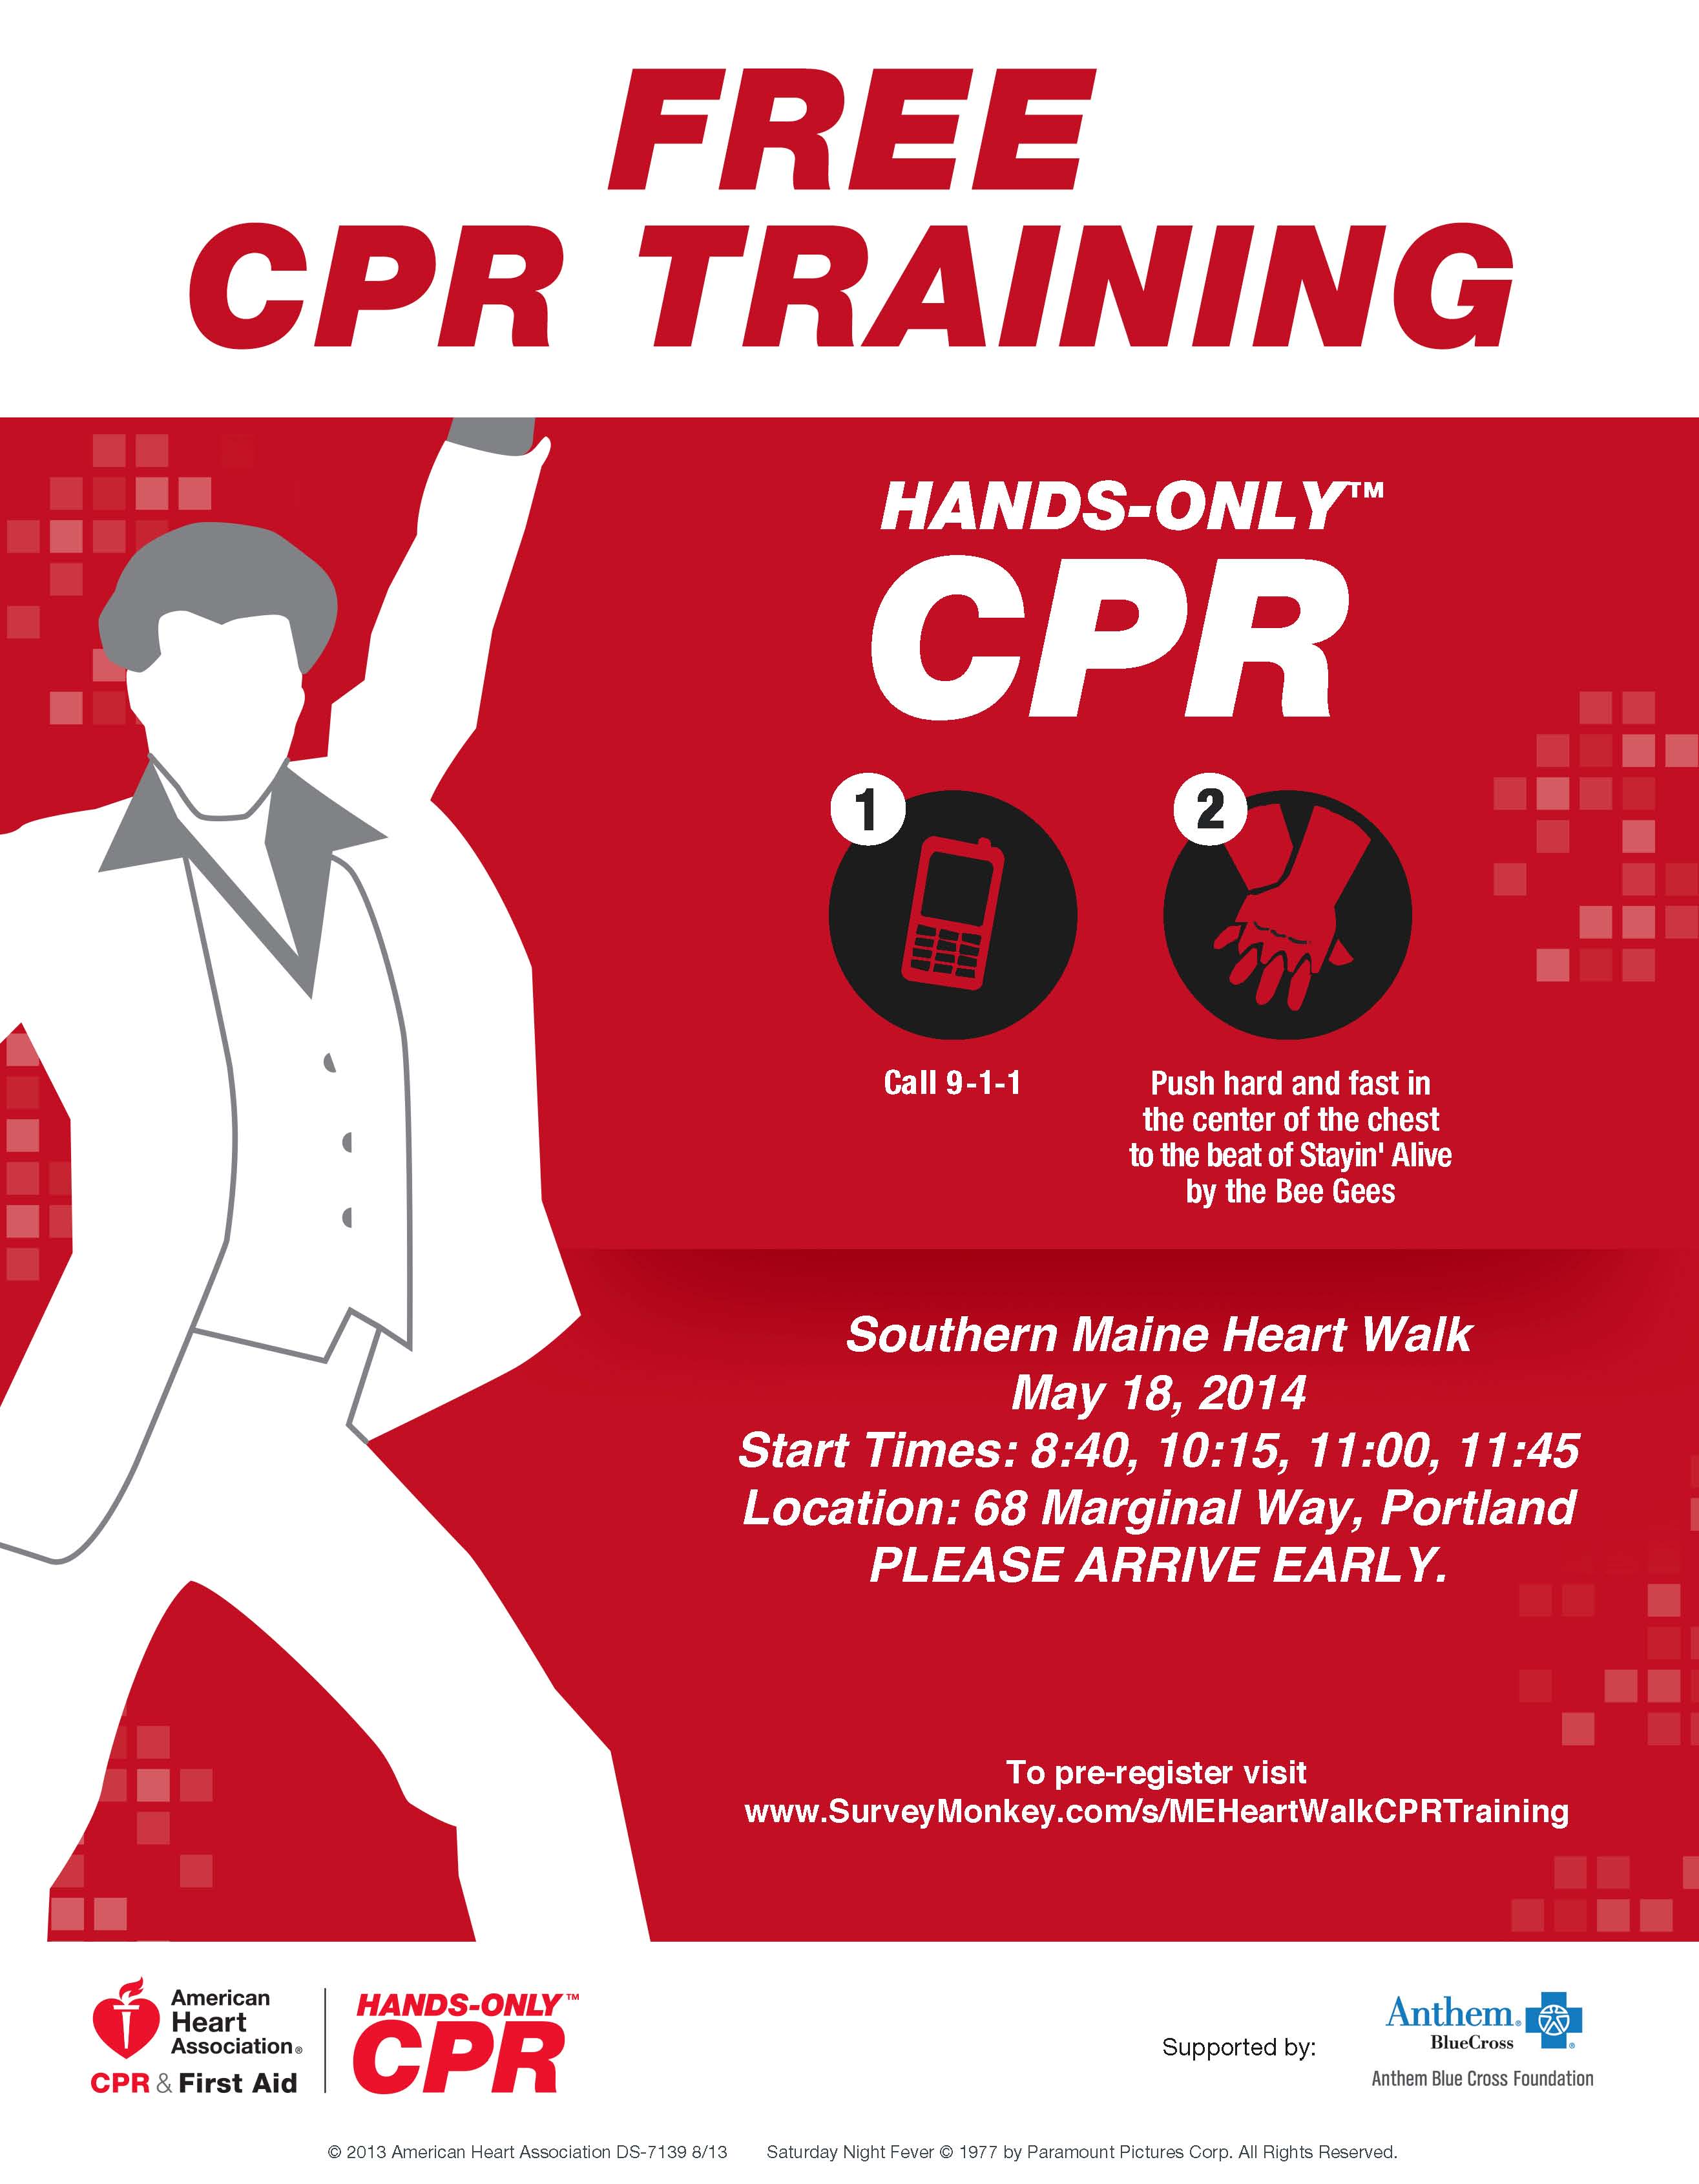 Learn How to Do HandsOnly CPR to the Beat of Stayin' Alive Catching